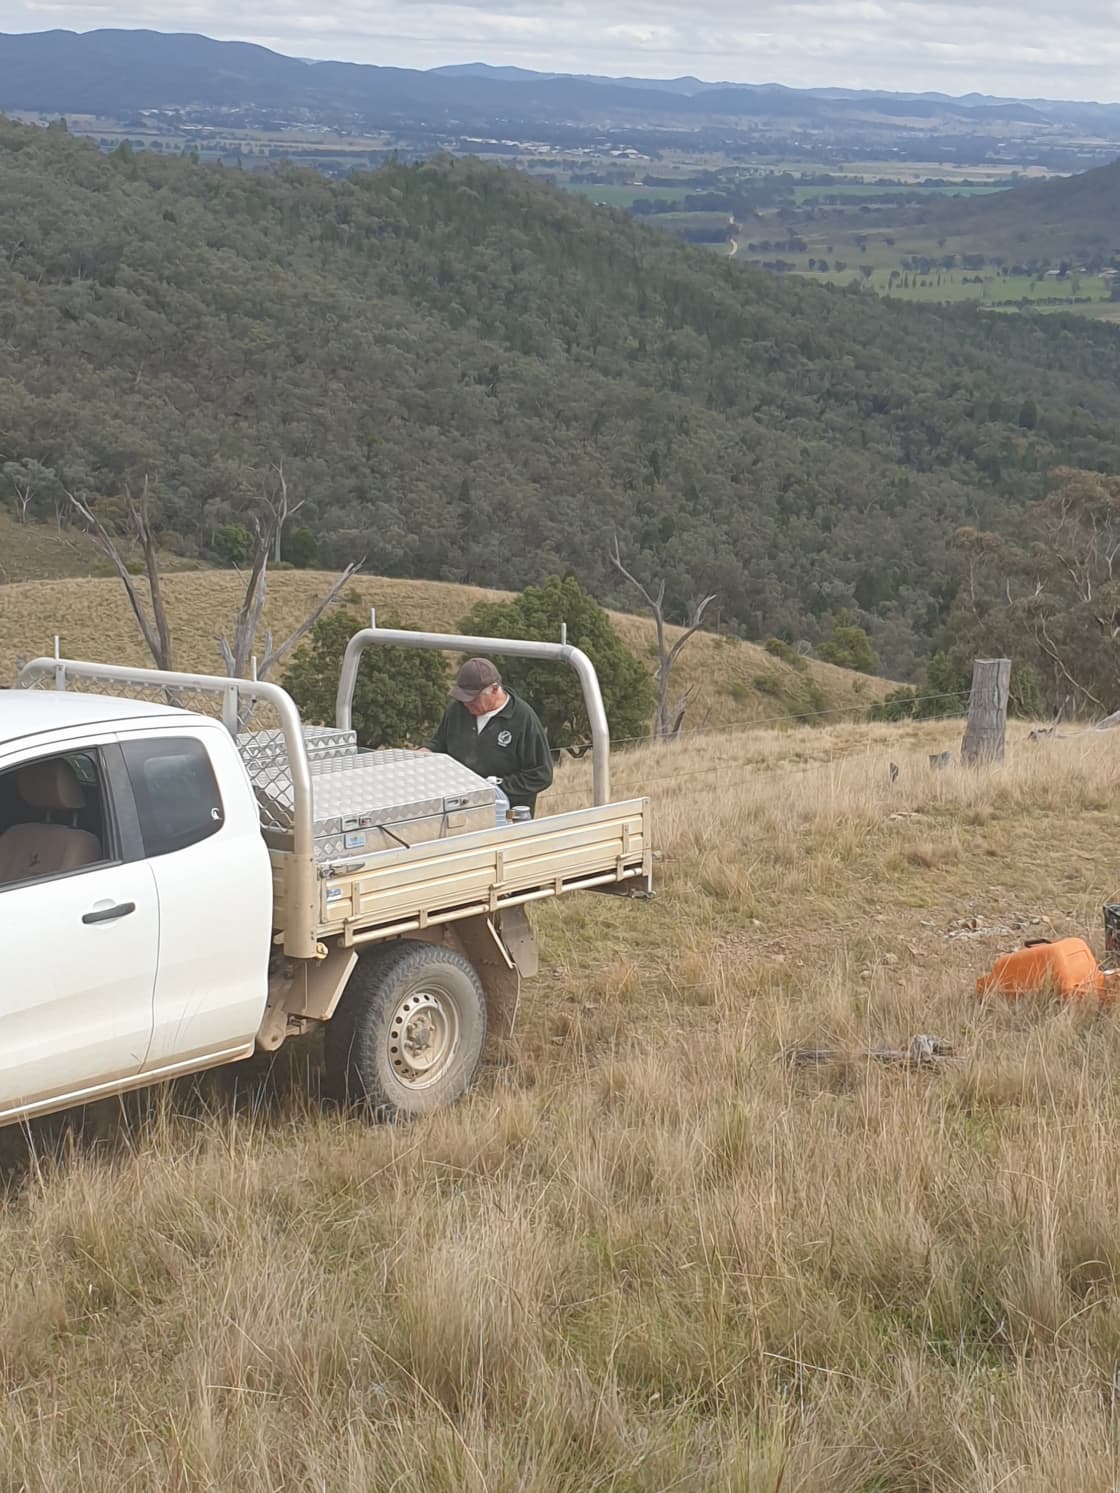 4WD trip up the mountain for a picnic 